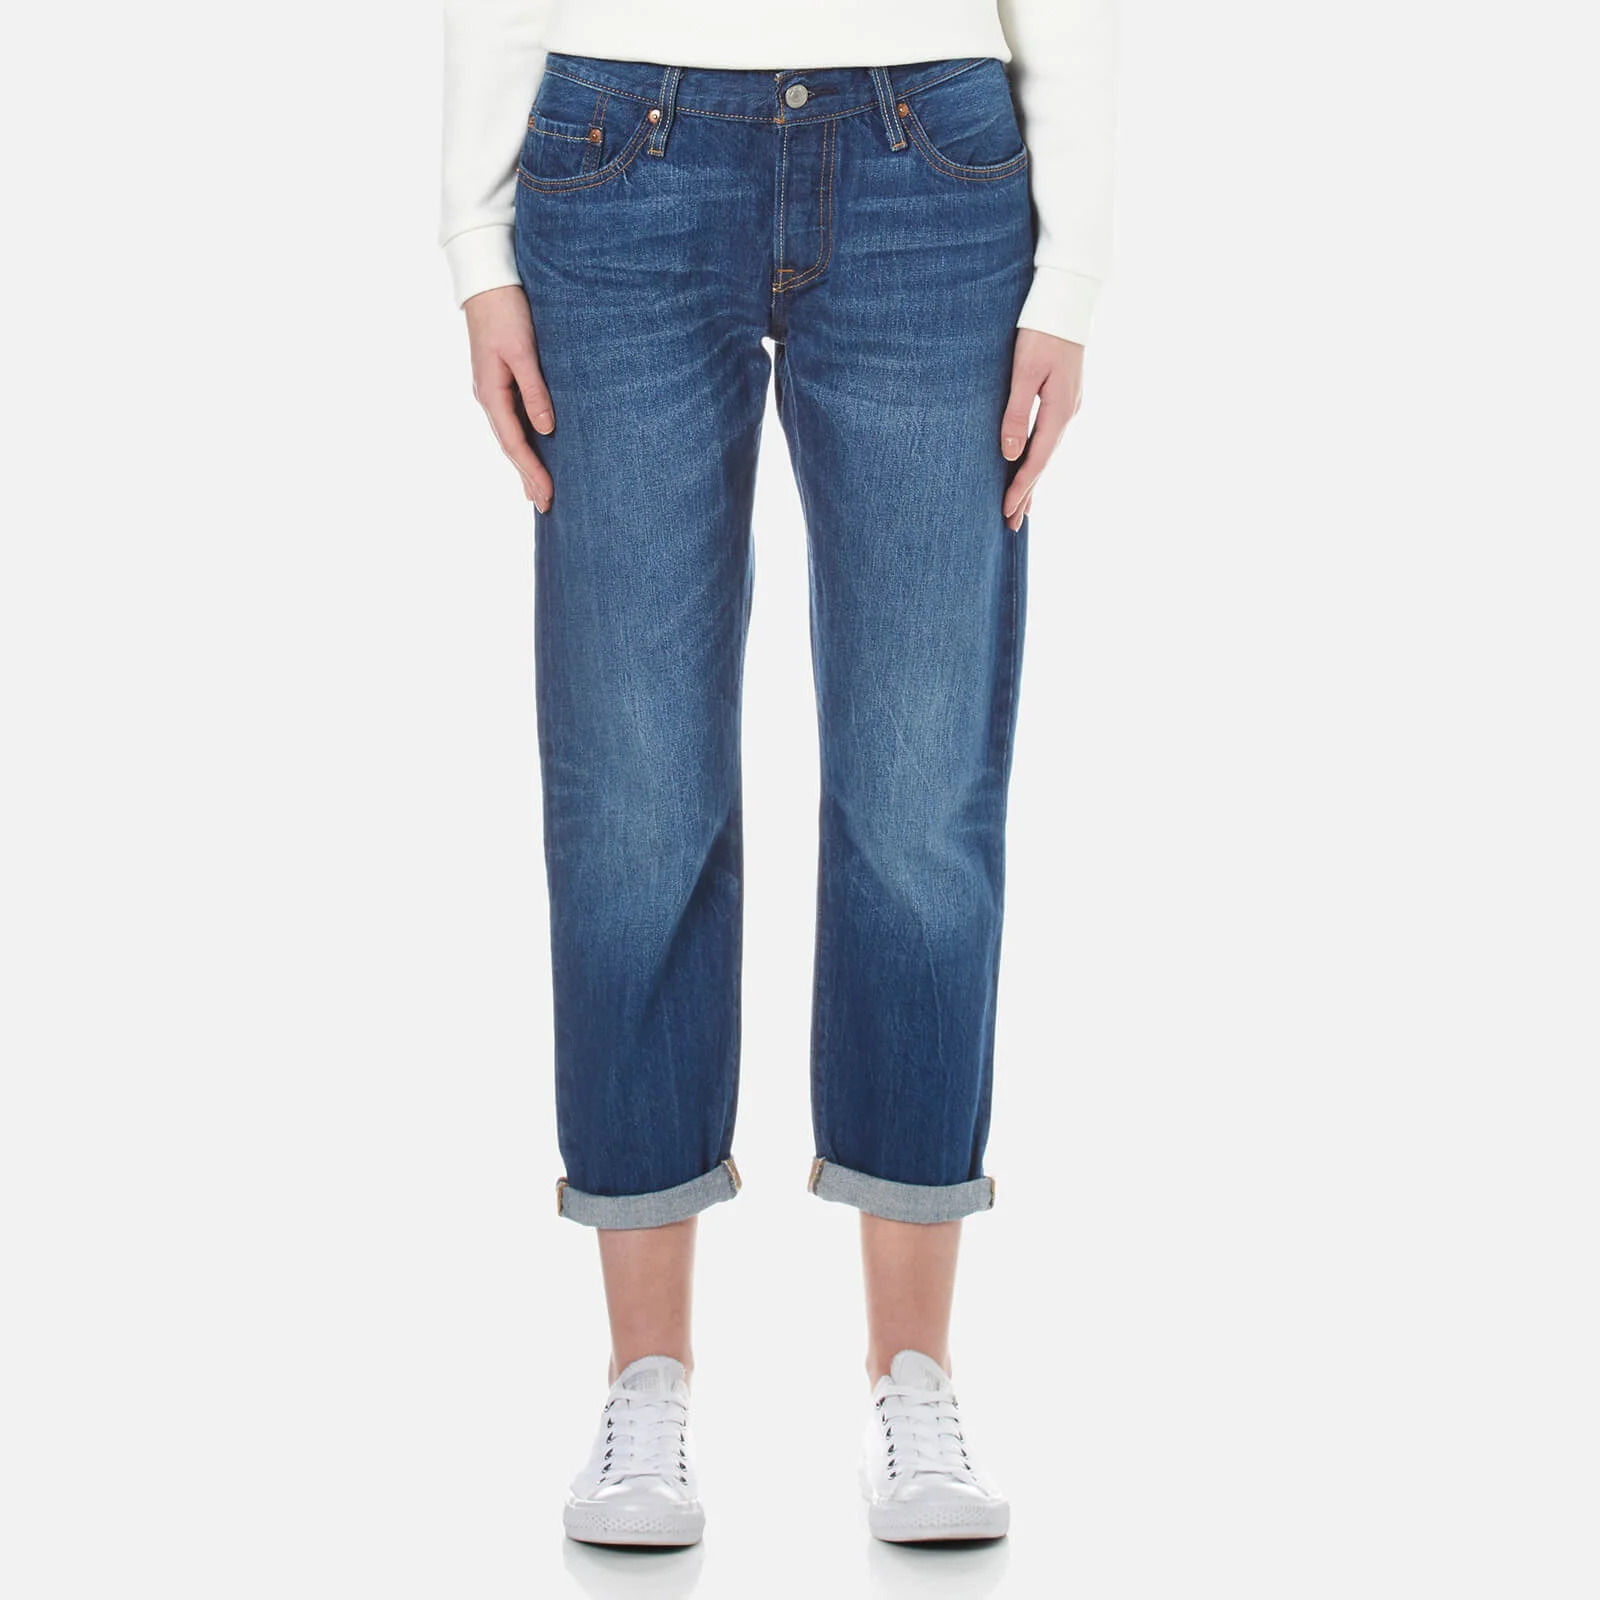 Levi's Women's 501 CT Jeans - Crate Digger Image 1